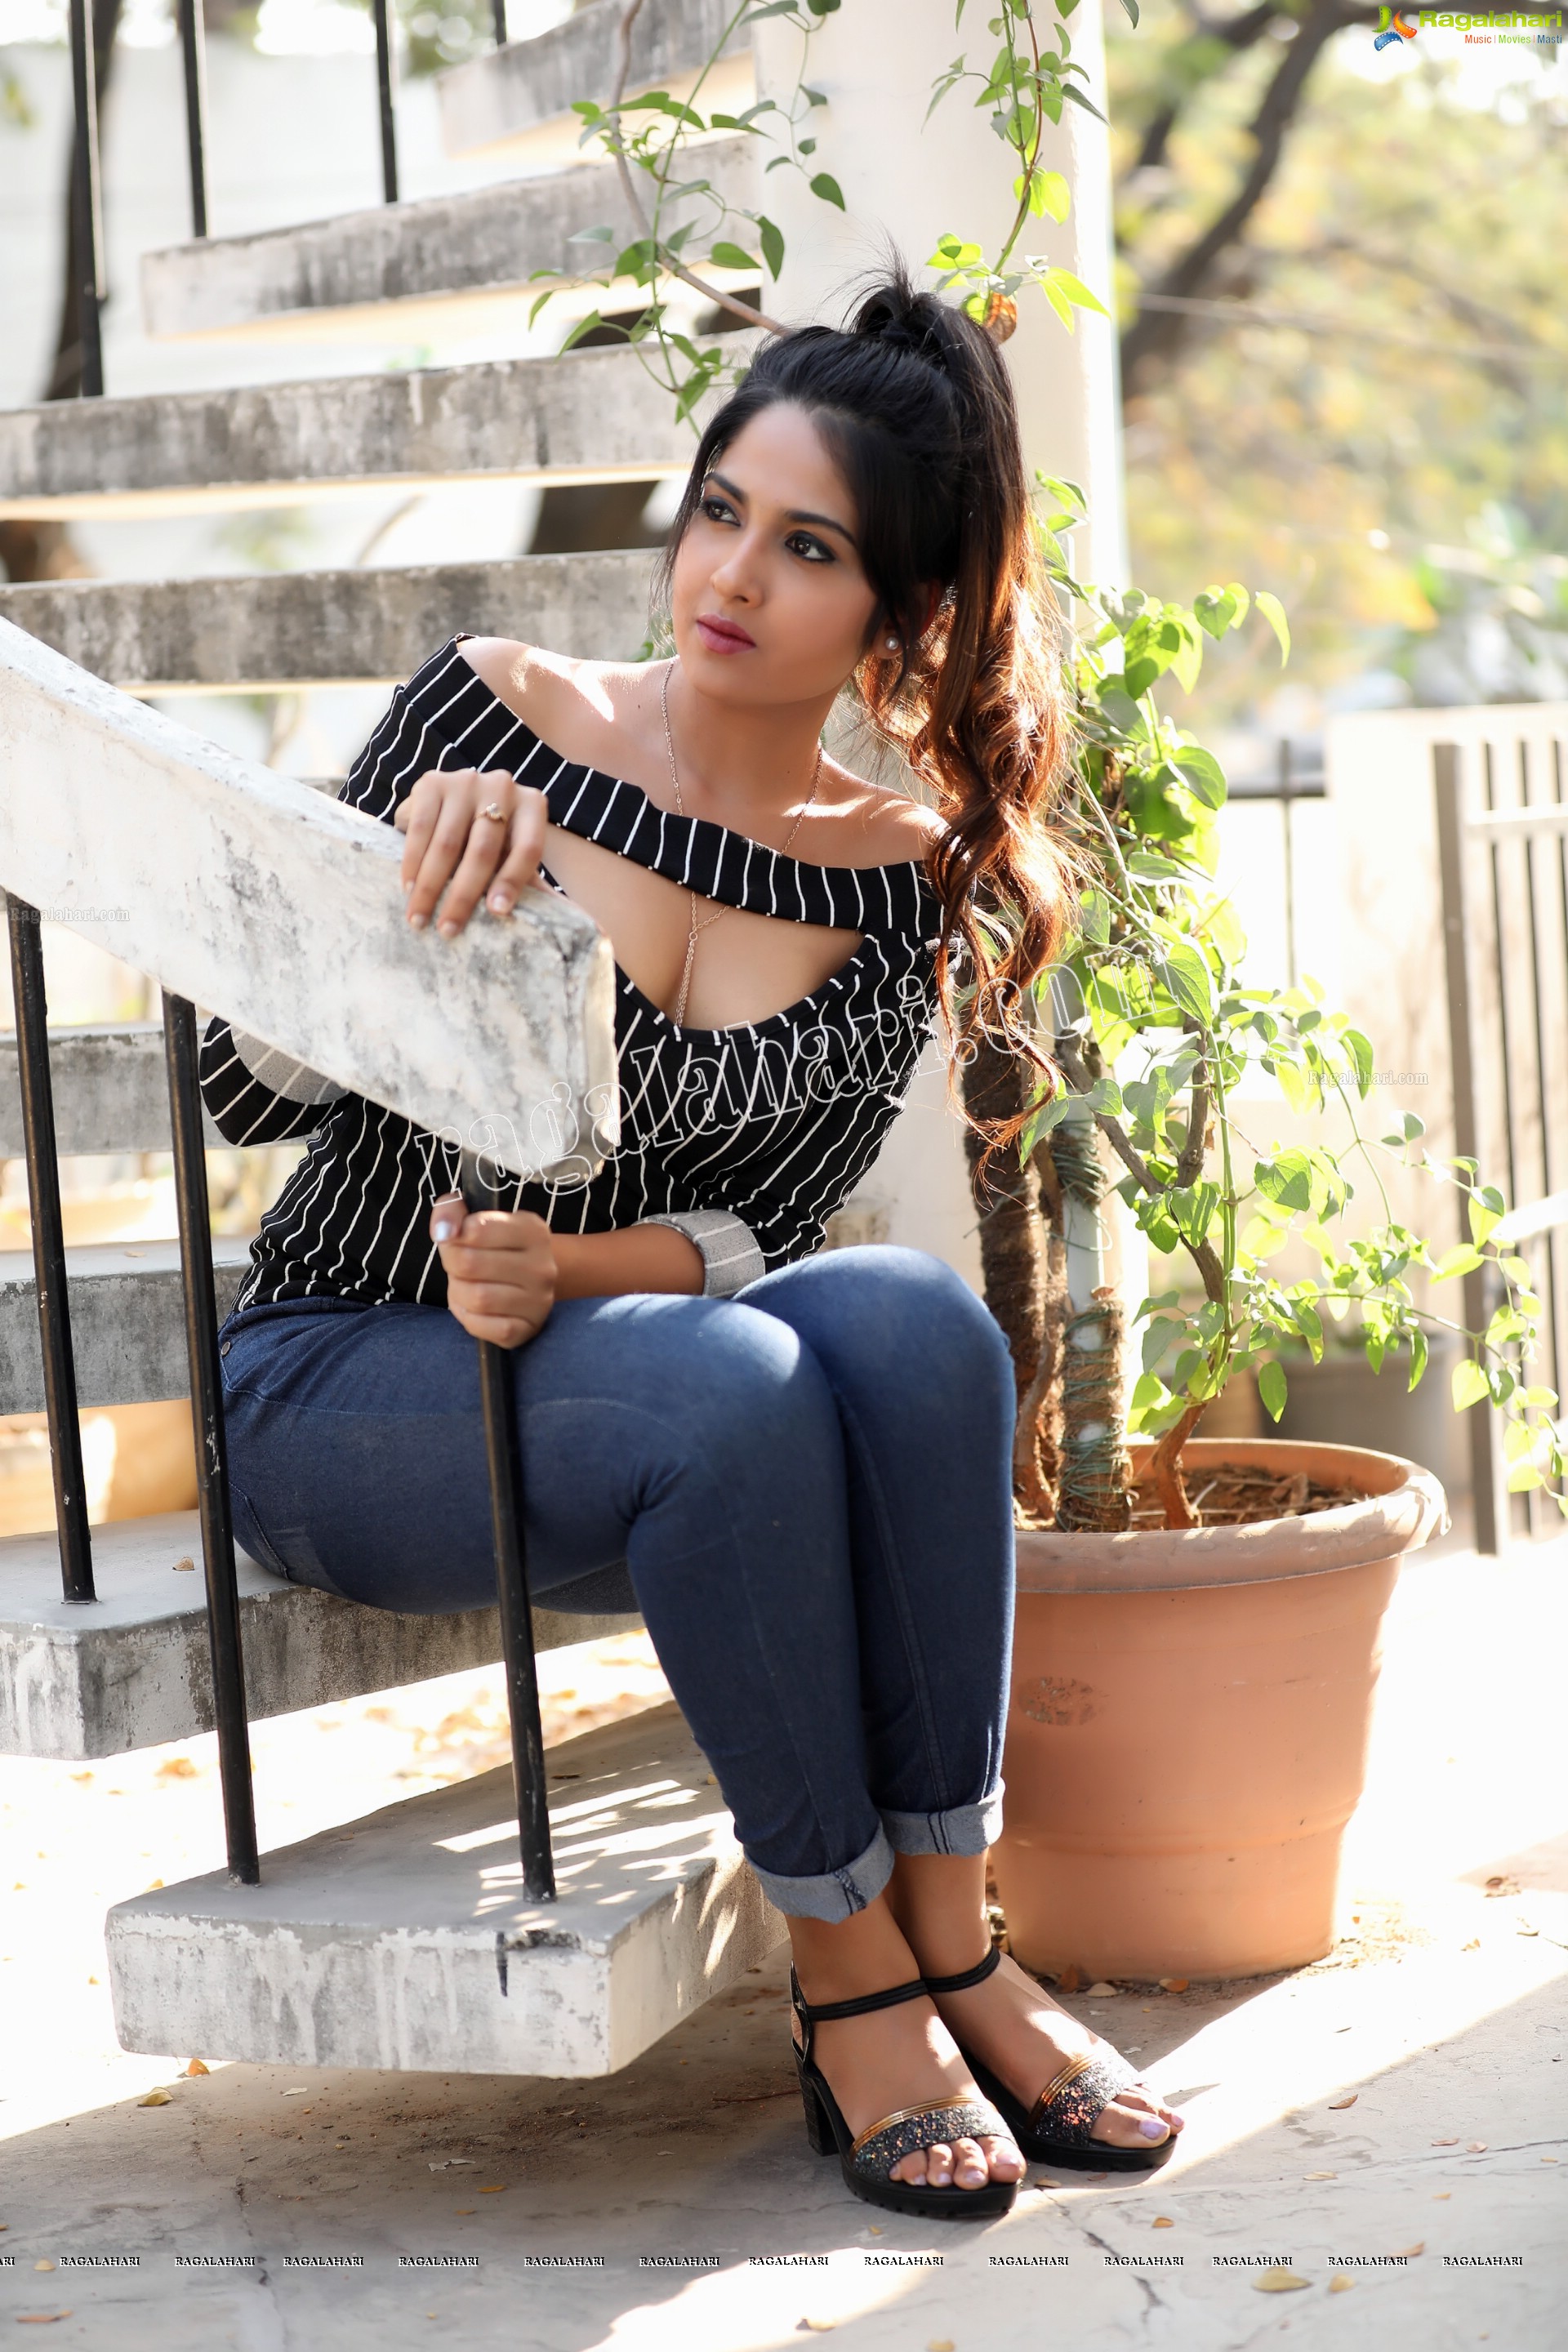 Simar Singh in Black Stripped Cutout Top and Jeans Exclusive Photo Shoot